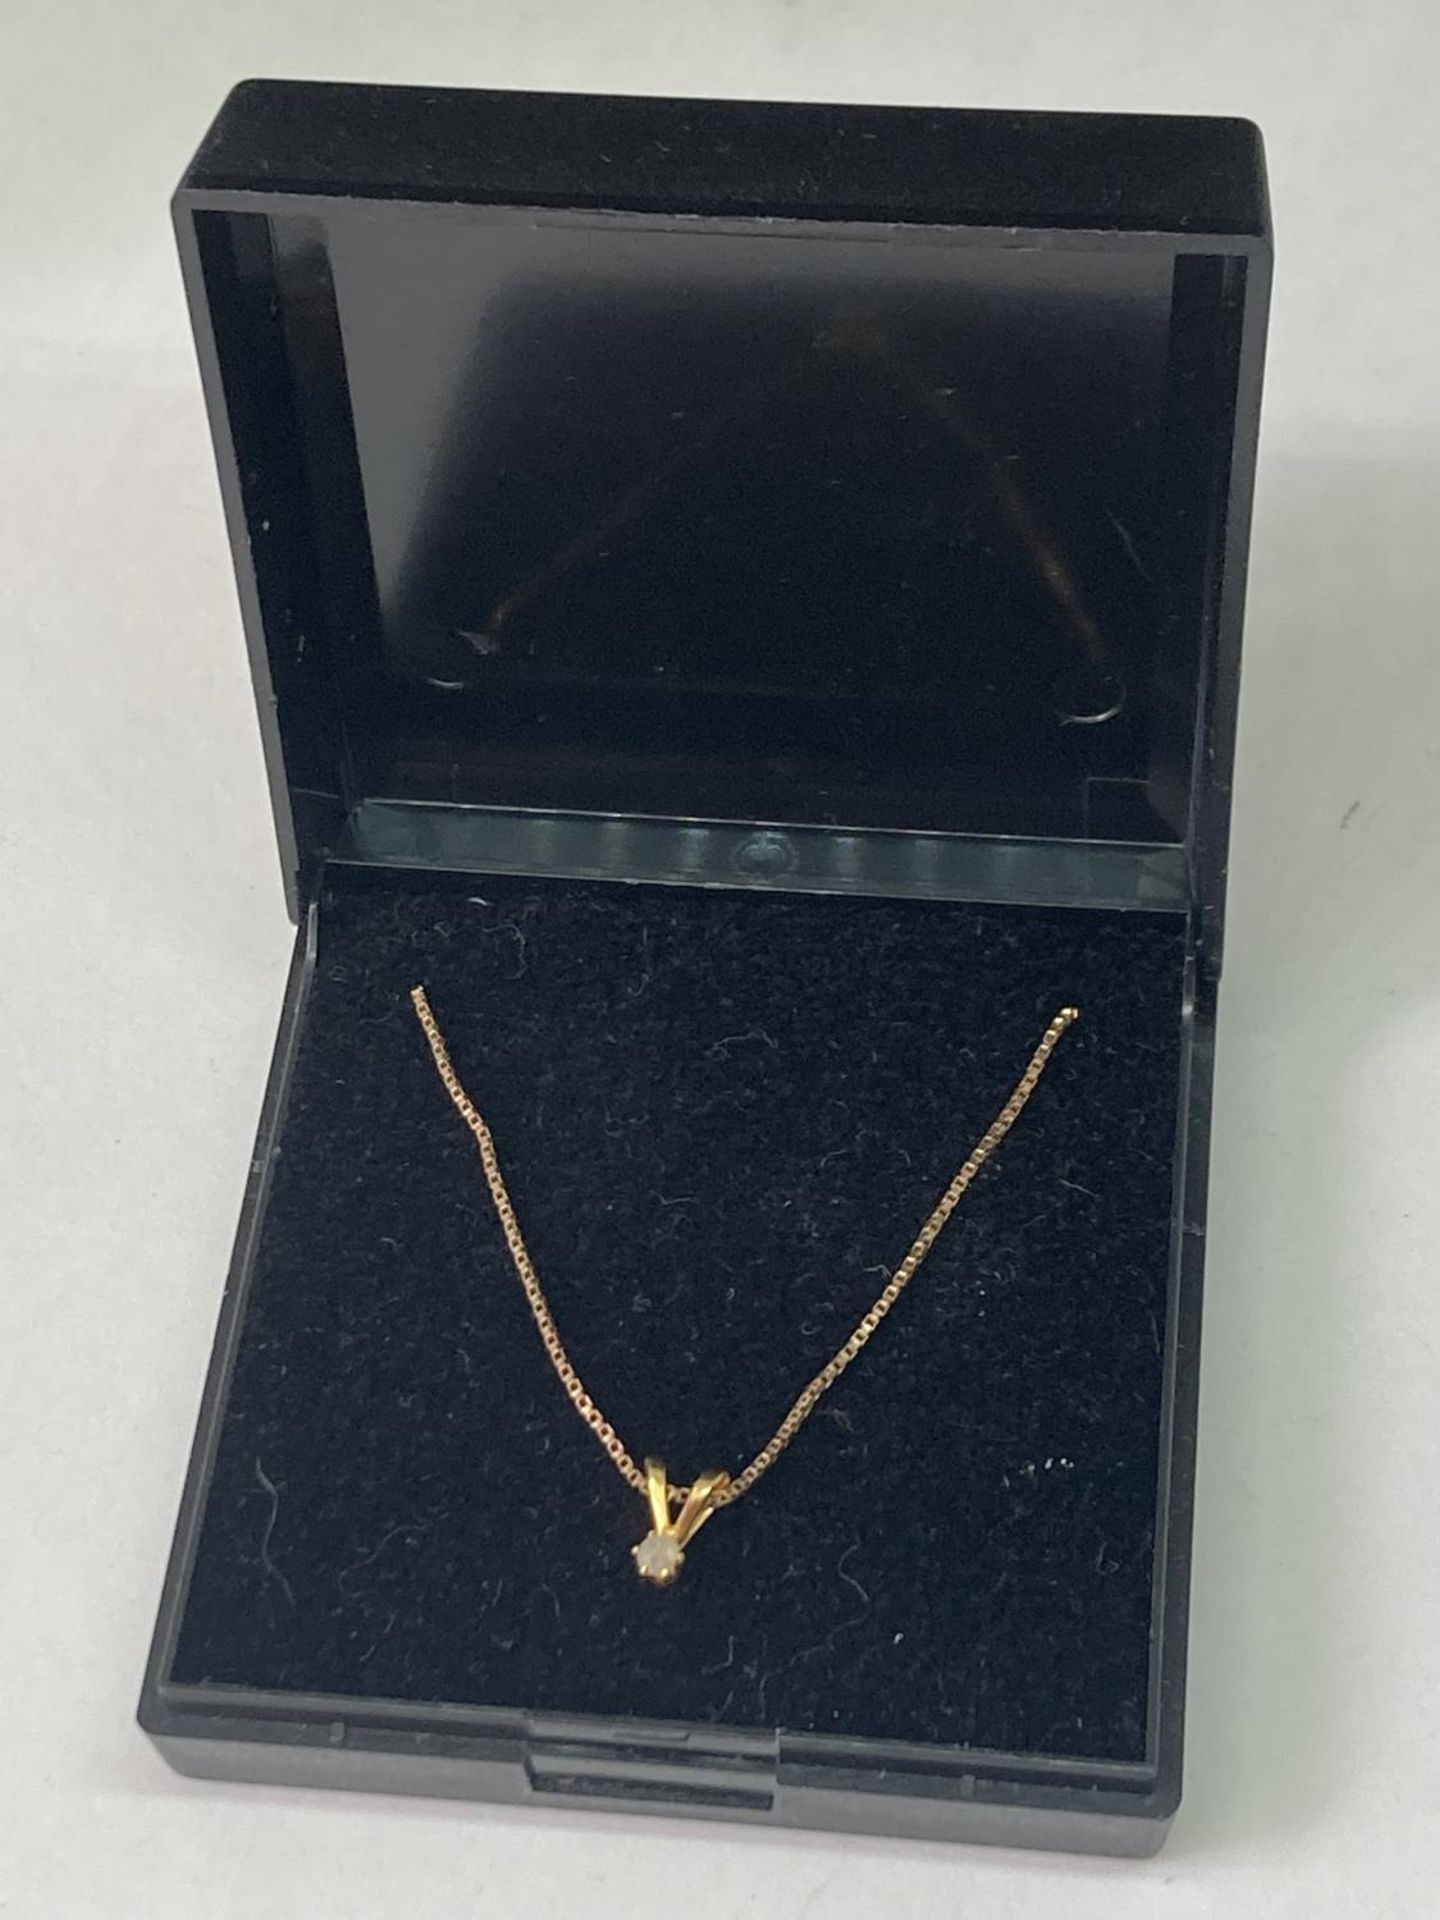 A 9 CARAT GOLD NECKLACE WITH A 9 CARAT GOLD AND DIAMOND PENDANT IN A PRESENTATION BOX